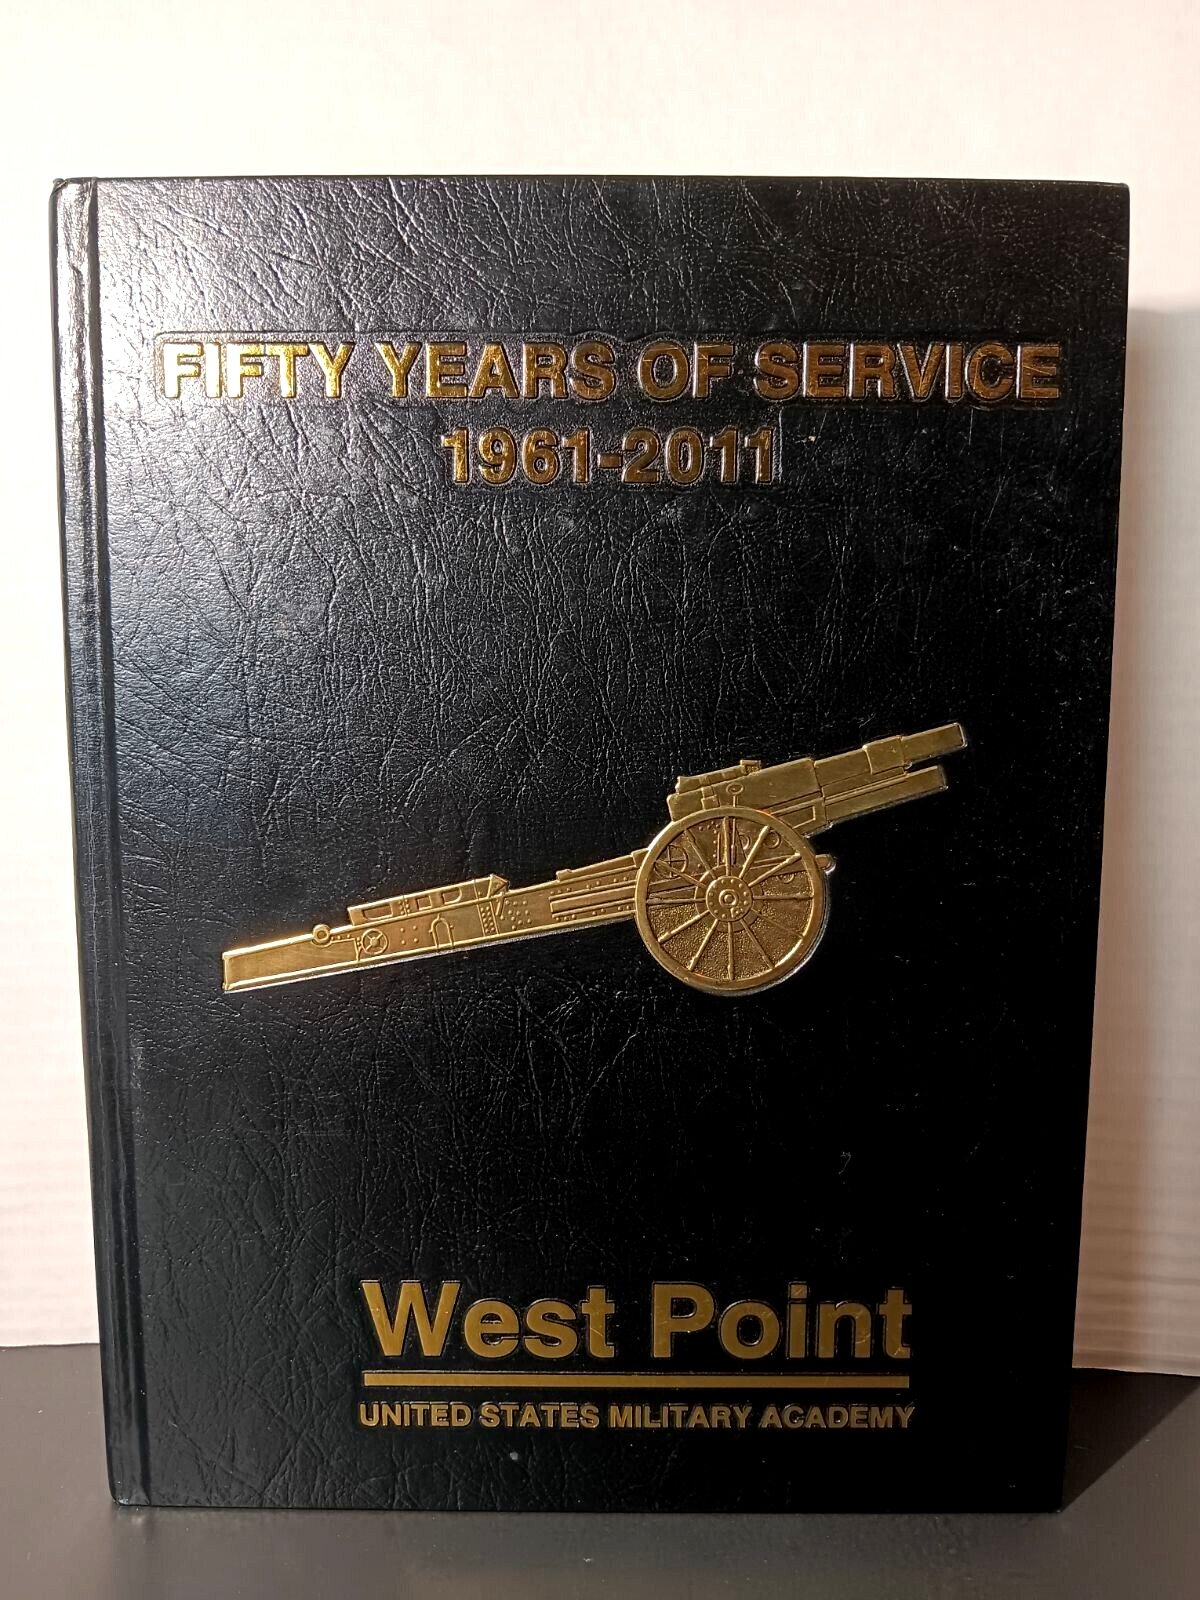 USMA Class Of 1961 Reunion Book 50 Years In Review West Point 1961 - 2011